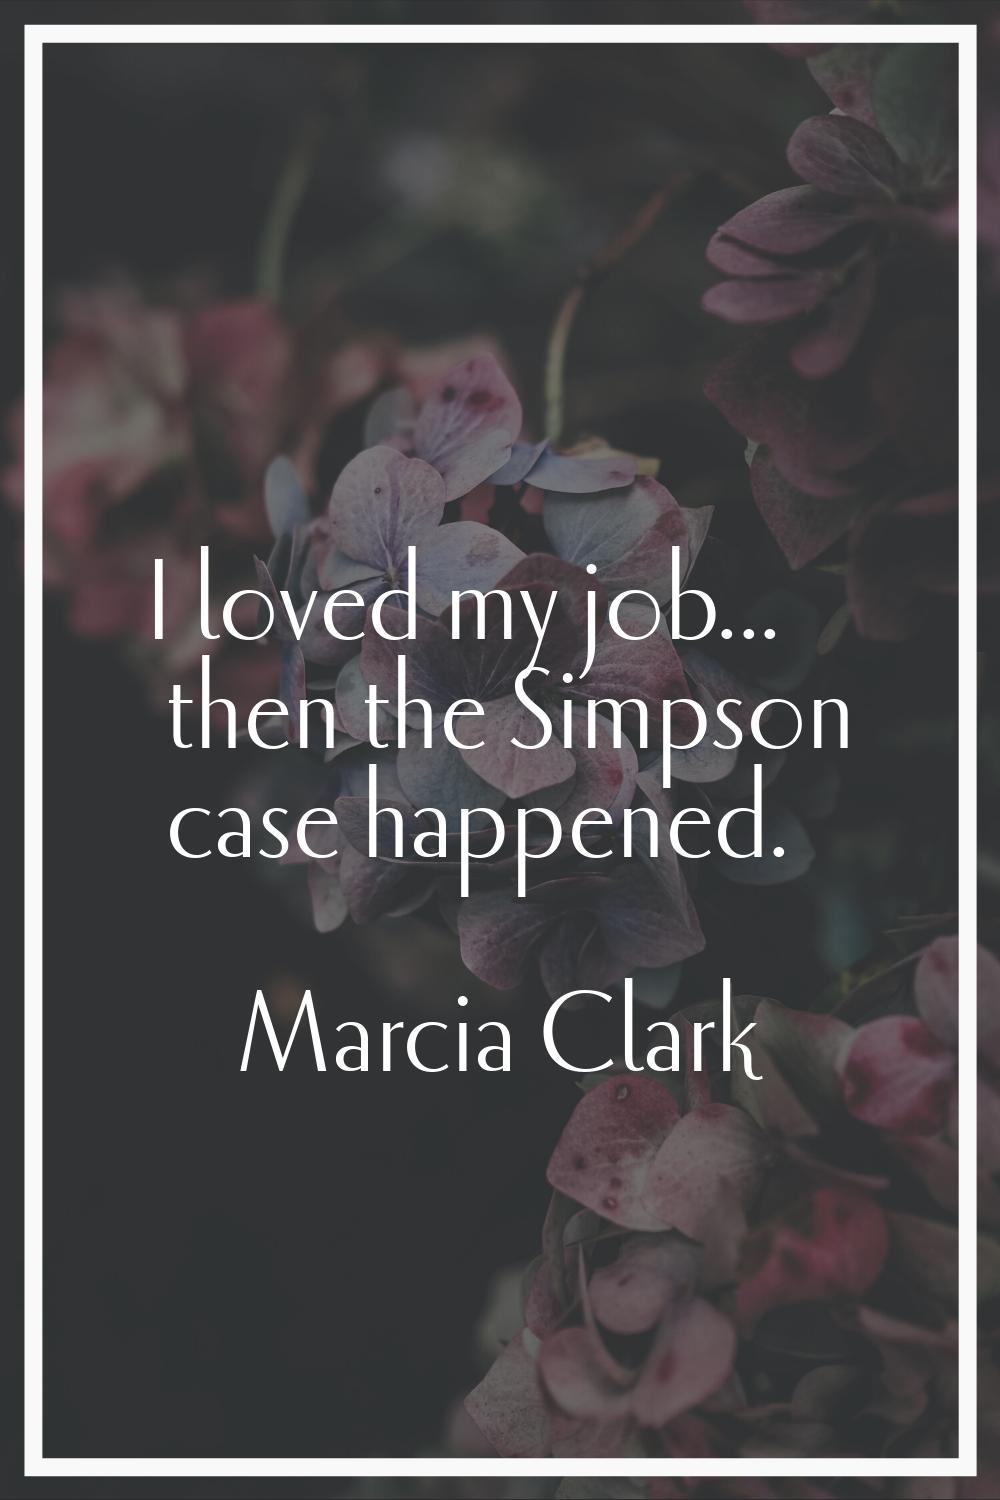 I loved my job... then the Simpson case happened.